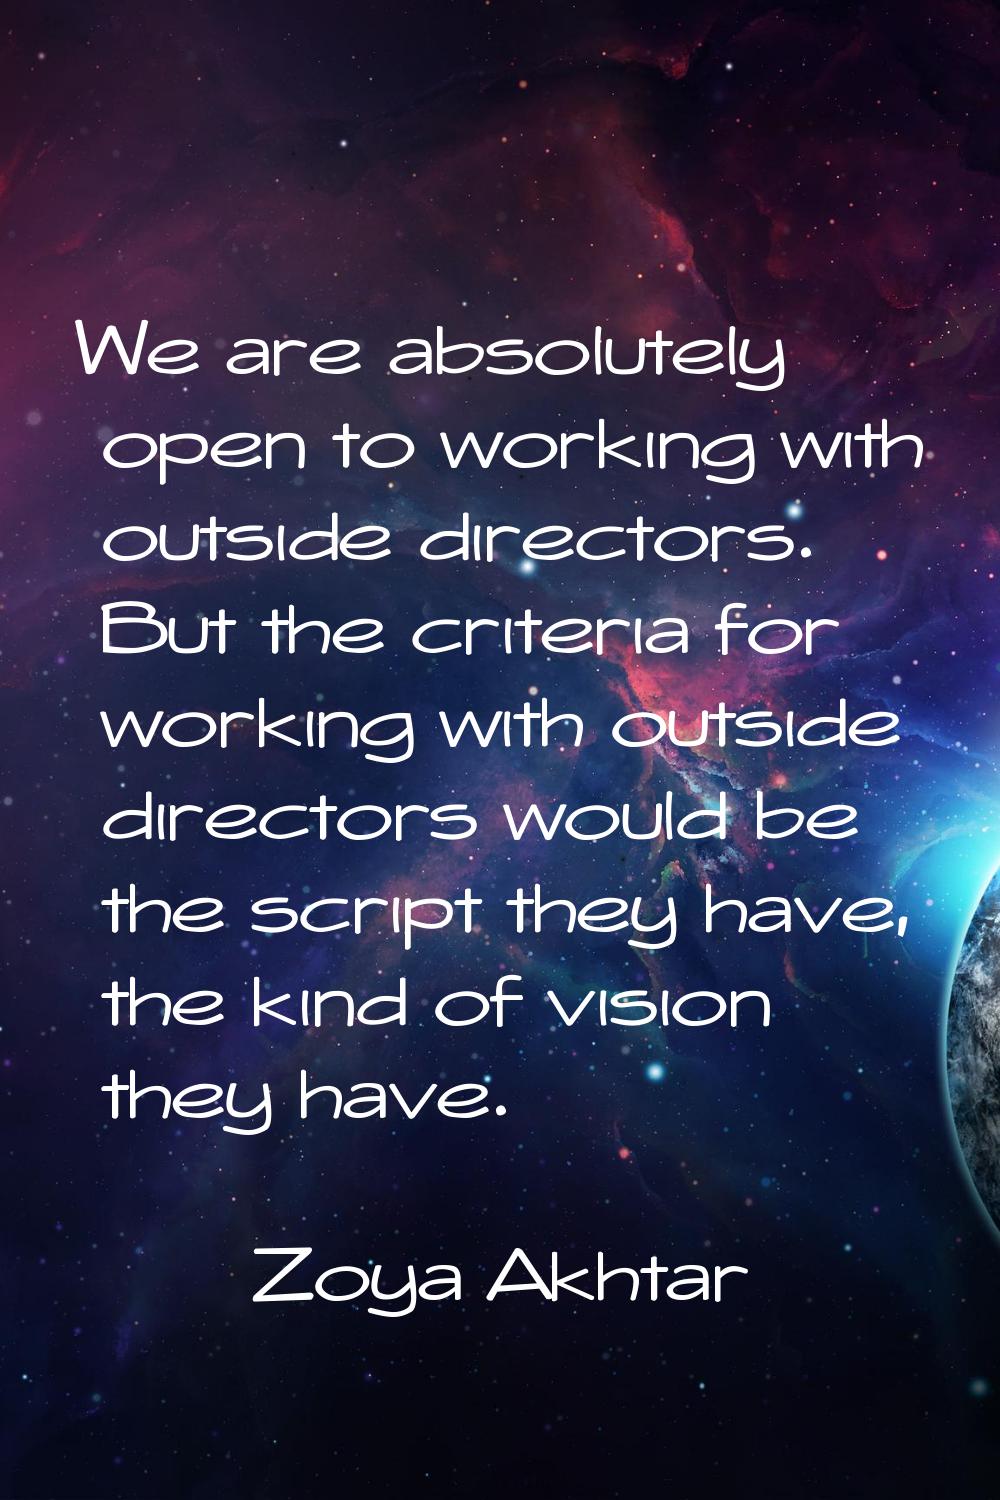 We are absolutely open to working with outside directors. But the criteria for working with outside